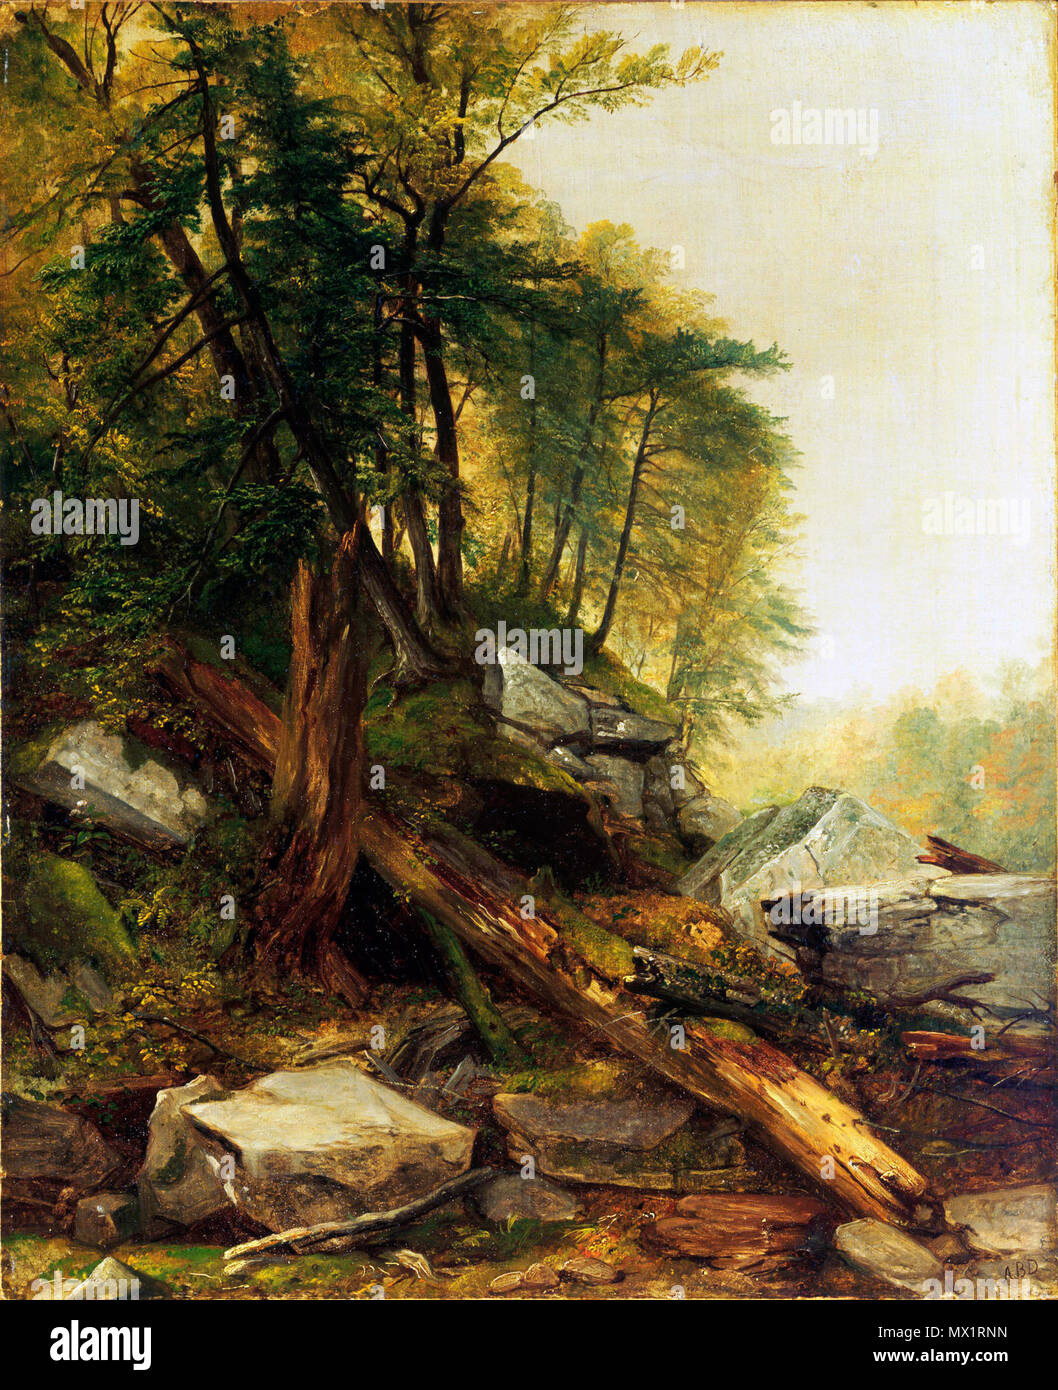 . Anglais : Asher Brown Durand, American, 1796-1886 Kaaterskill Paysage, 1850 huile sur toile 54 x 44 cm. (21 1/4 x 17 5/16 in.) SECTION : 77,2 × 67,2 × 8,5 cm (30 3/8 x 26 7/16 x 3 3/8 in.), l'achat du musée John Maclean Magie, classe de 1892, et de Gertrude Magie Fund y1946-104 . 18508 1850, Durand, Asher Brown, paysage Kaaterskill Banque D'Images